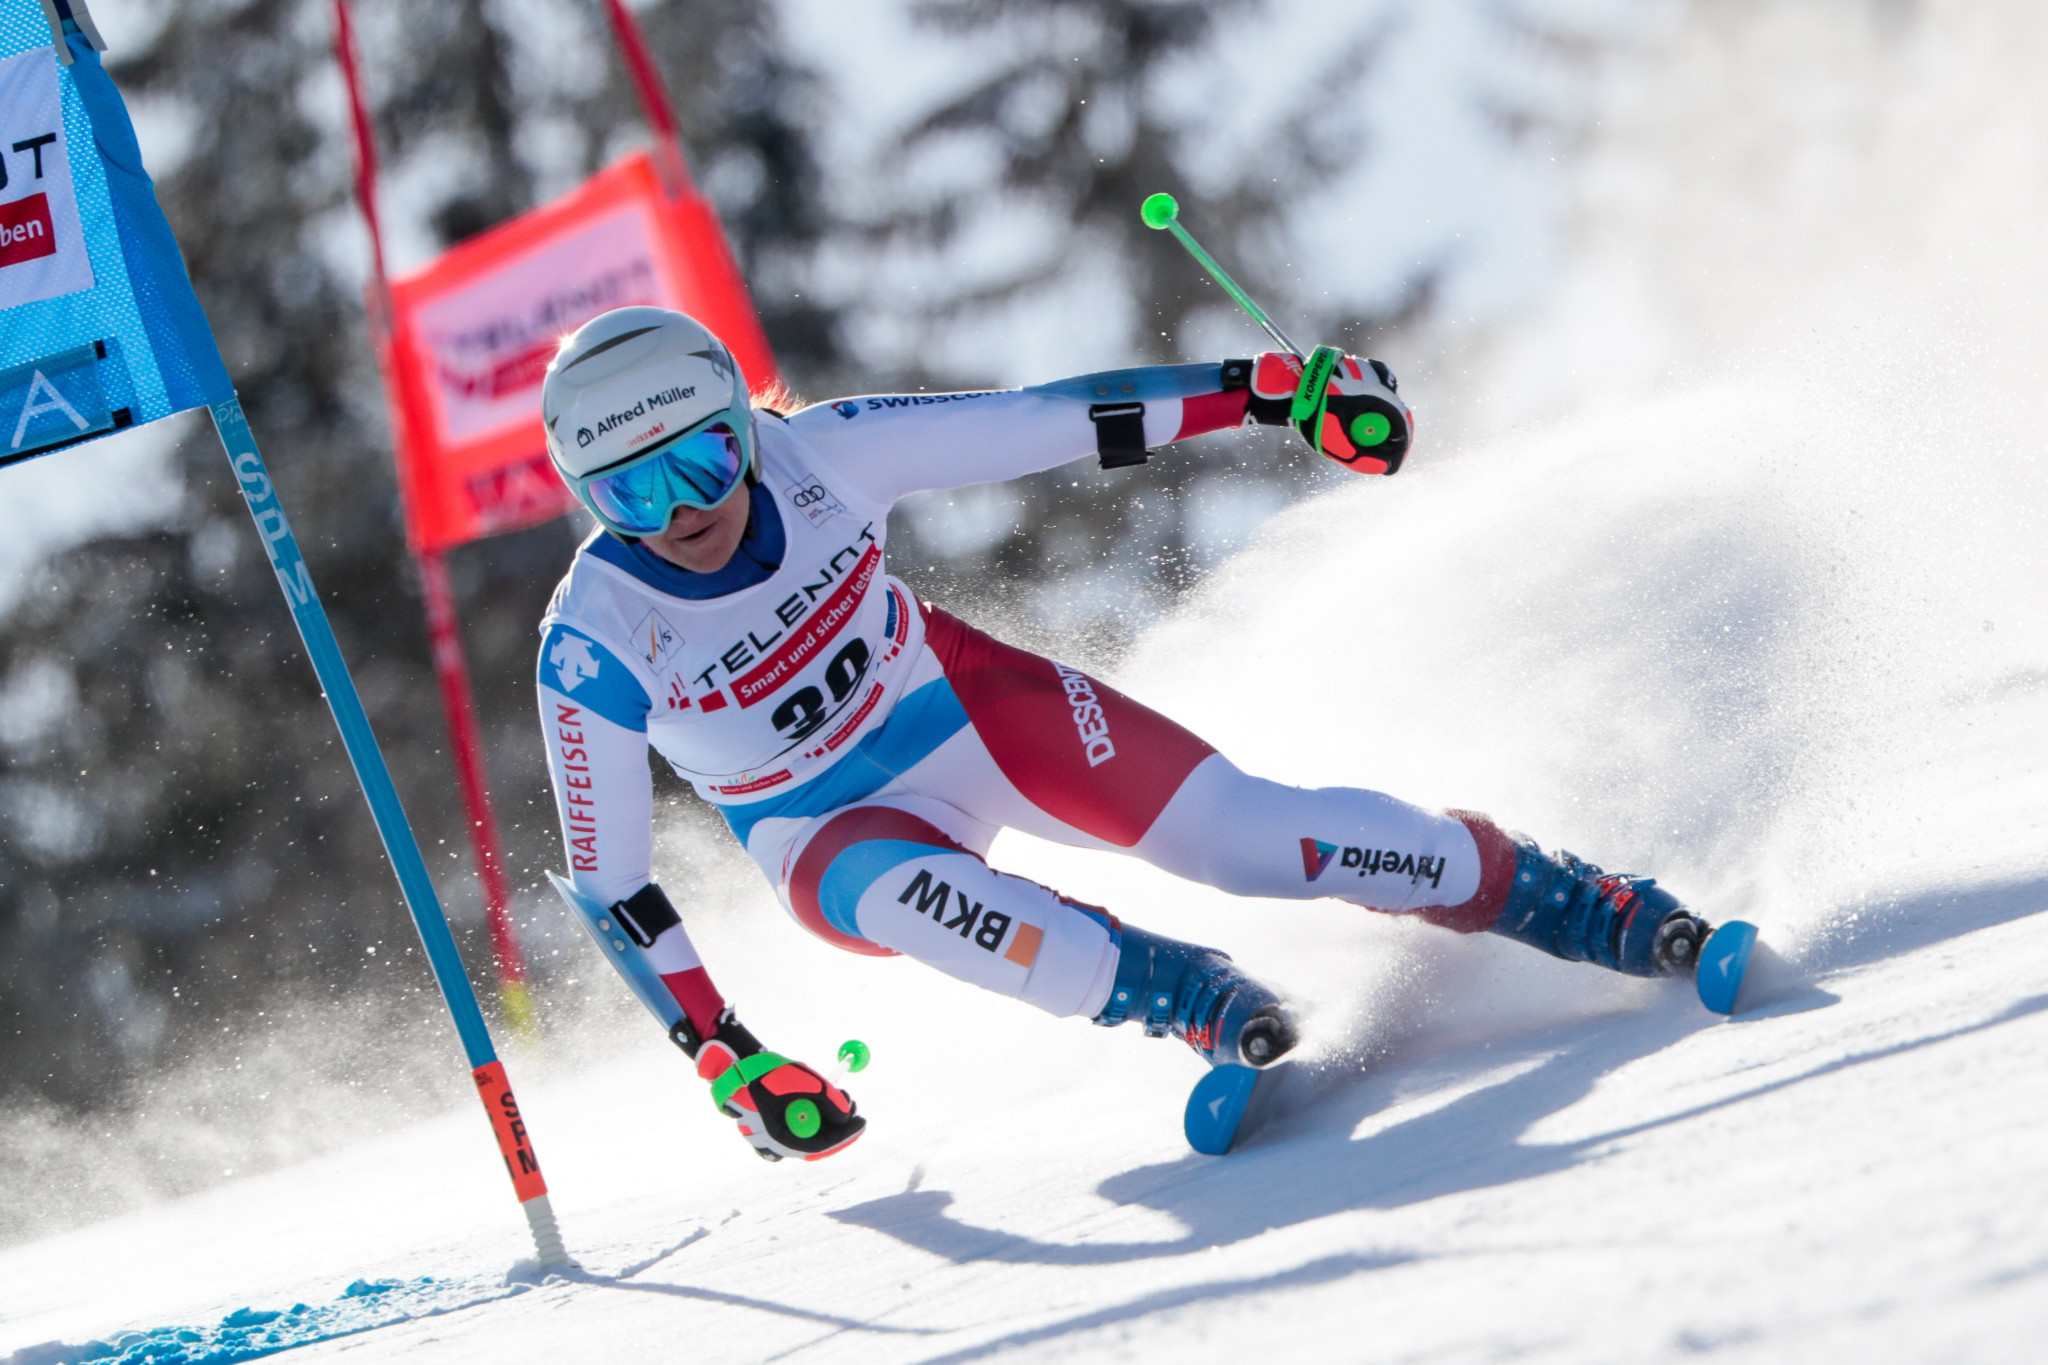 Nufer, Murisier and Simonet added to 19-person Swiss national Alpine skiing team